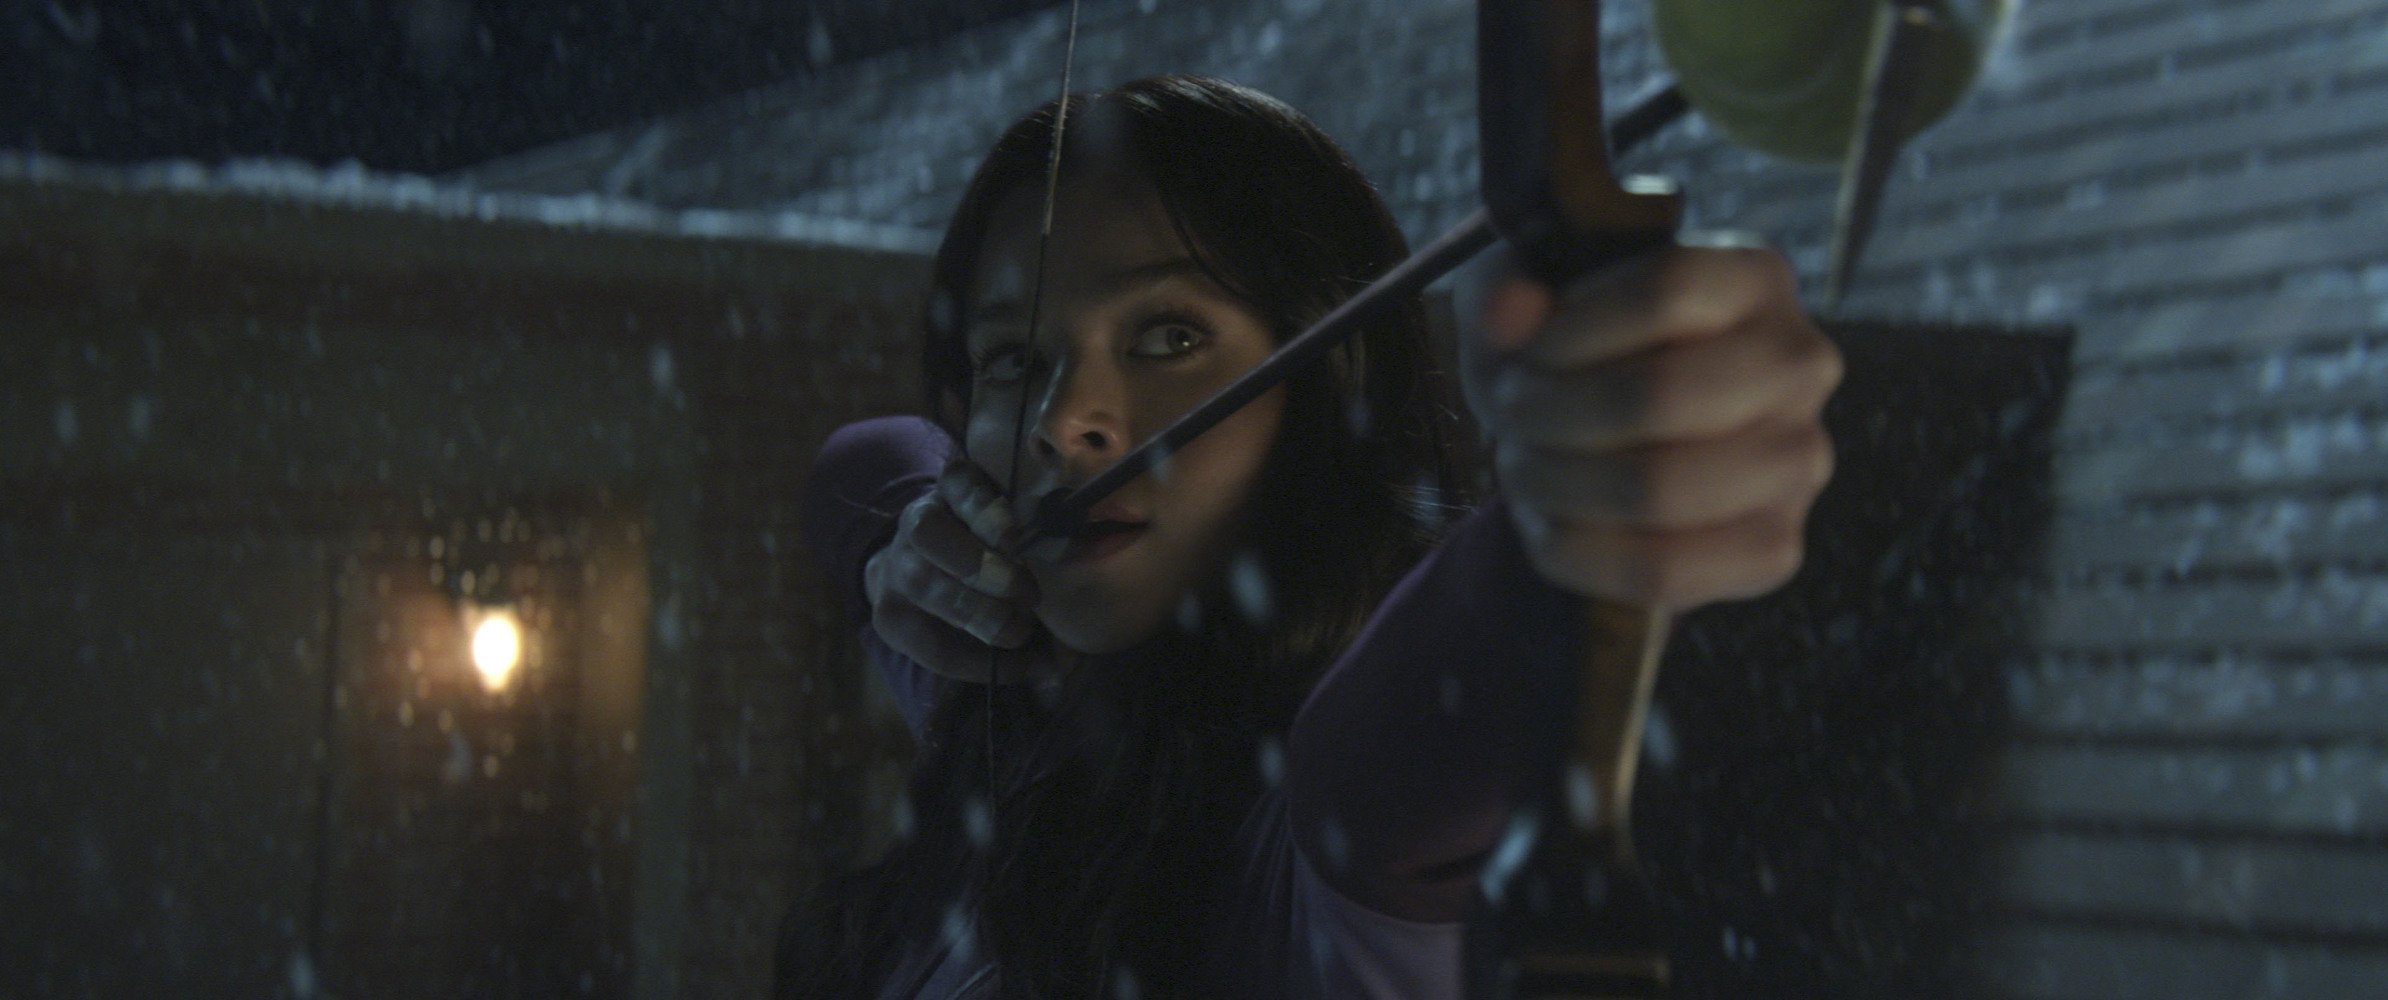 Hailee Steinfeld as Kate Bishop in Marvel's 'Hawkeye.' She's shooting a bow and arrow.